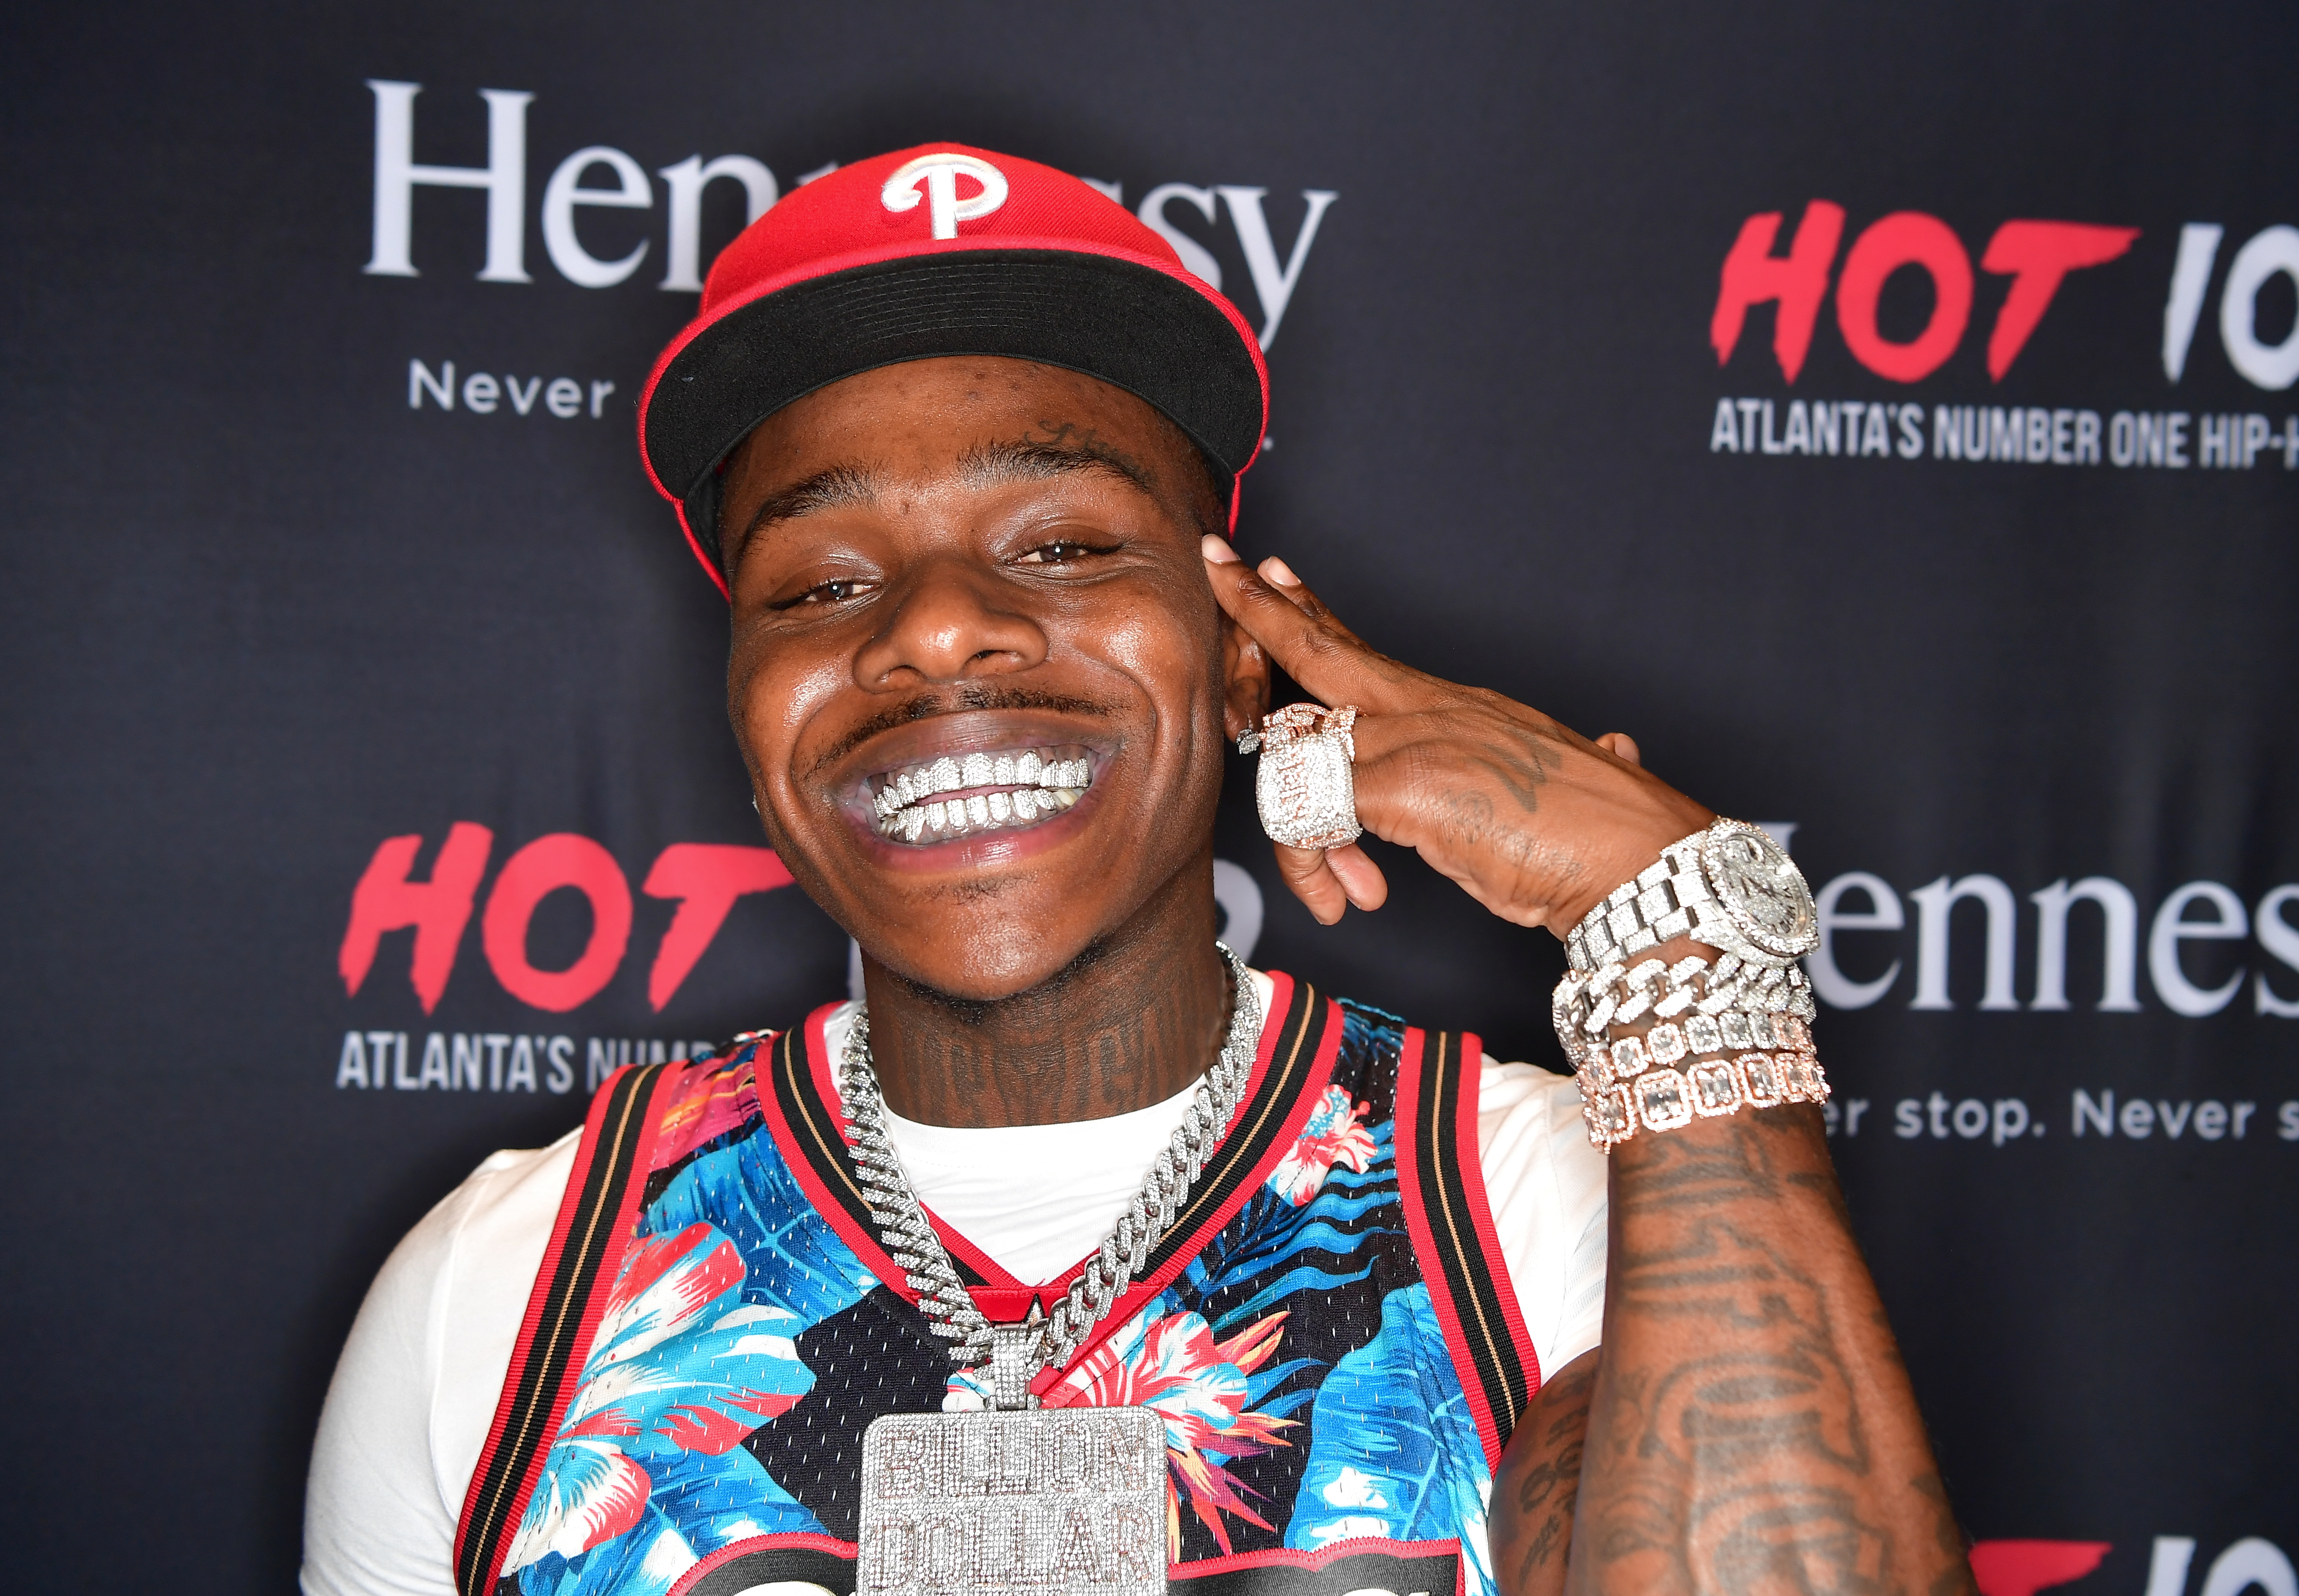 KIRK (@dababy) • Instagram photos and videos